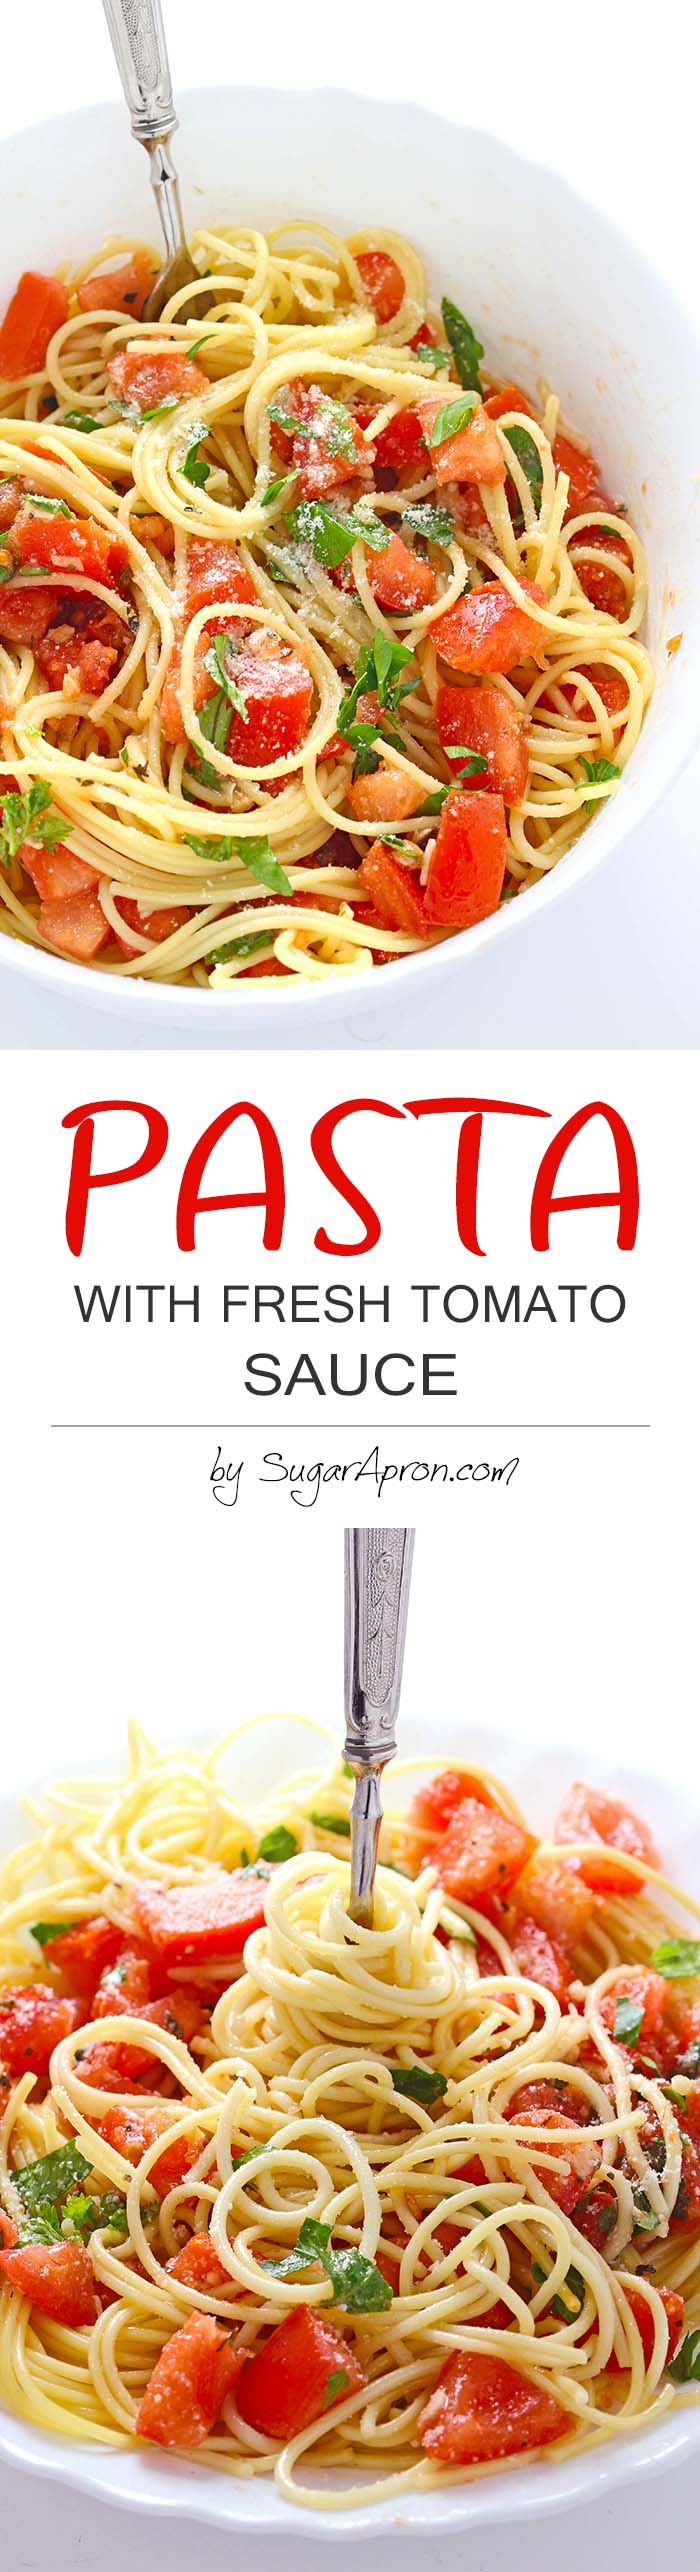 Sometimes you just want something simple for dinner, and this Pasta with Fresh Tomato Sauce is about as simple as it gets. 